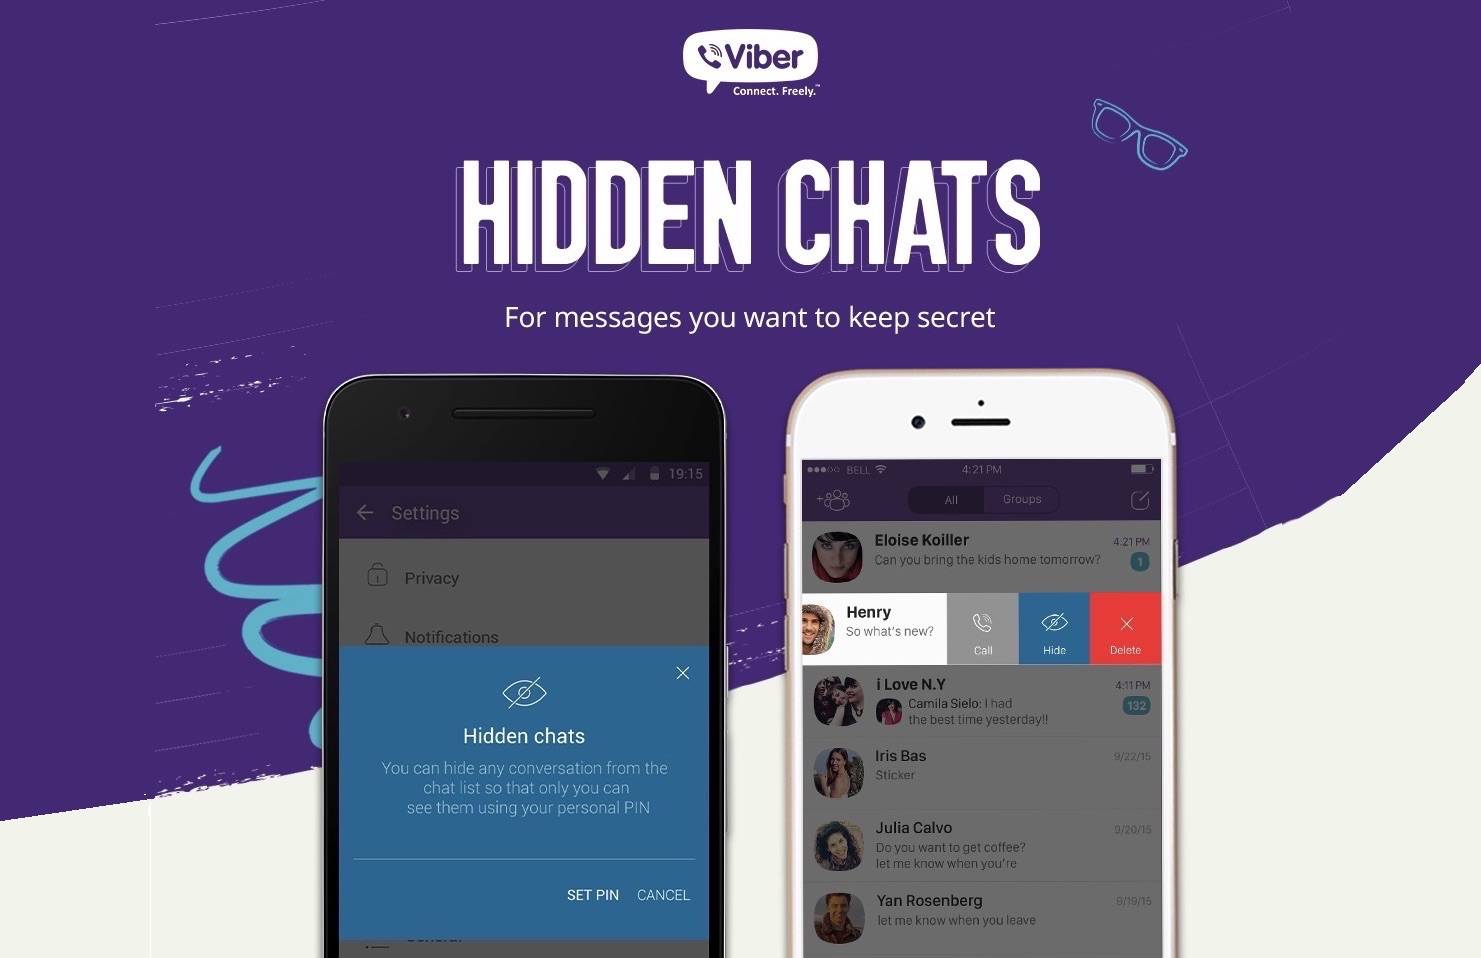 viber message receive from this recipient is encrypted